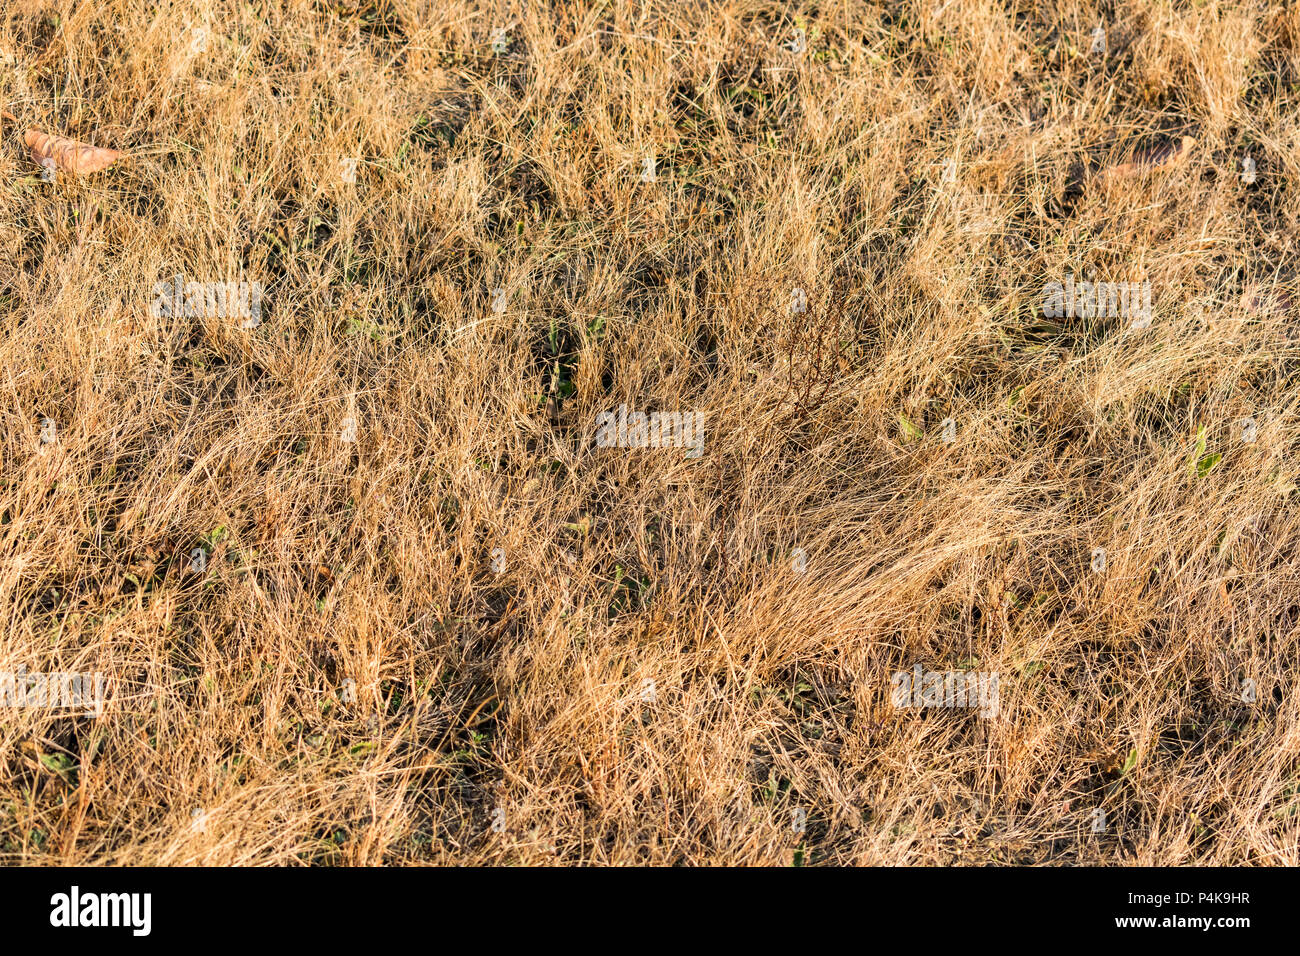 Small dry herbage in field looking awesome at morning in winter season. Stock Photo